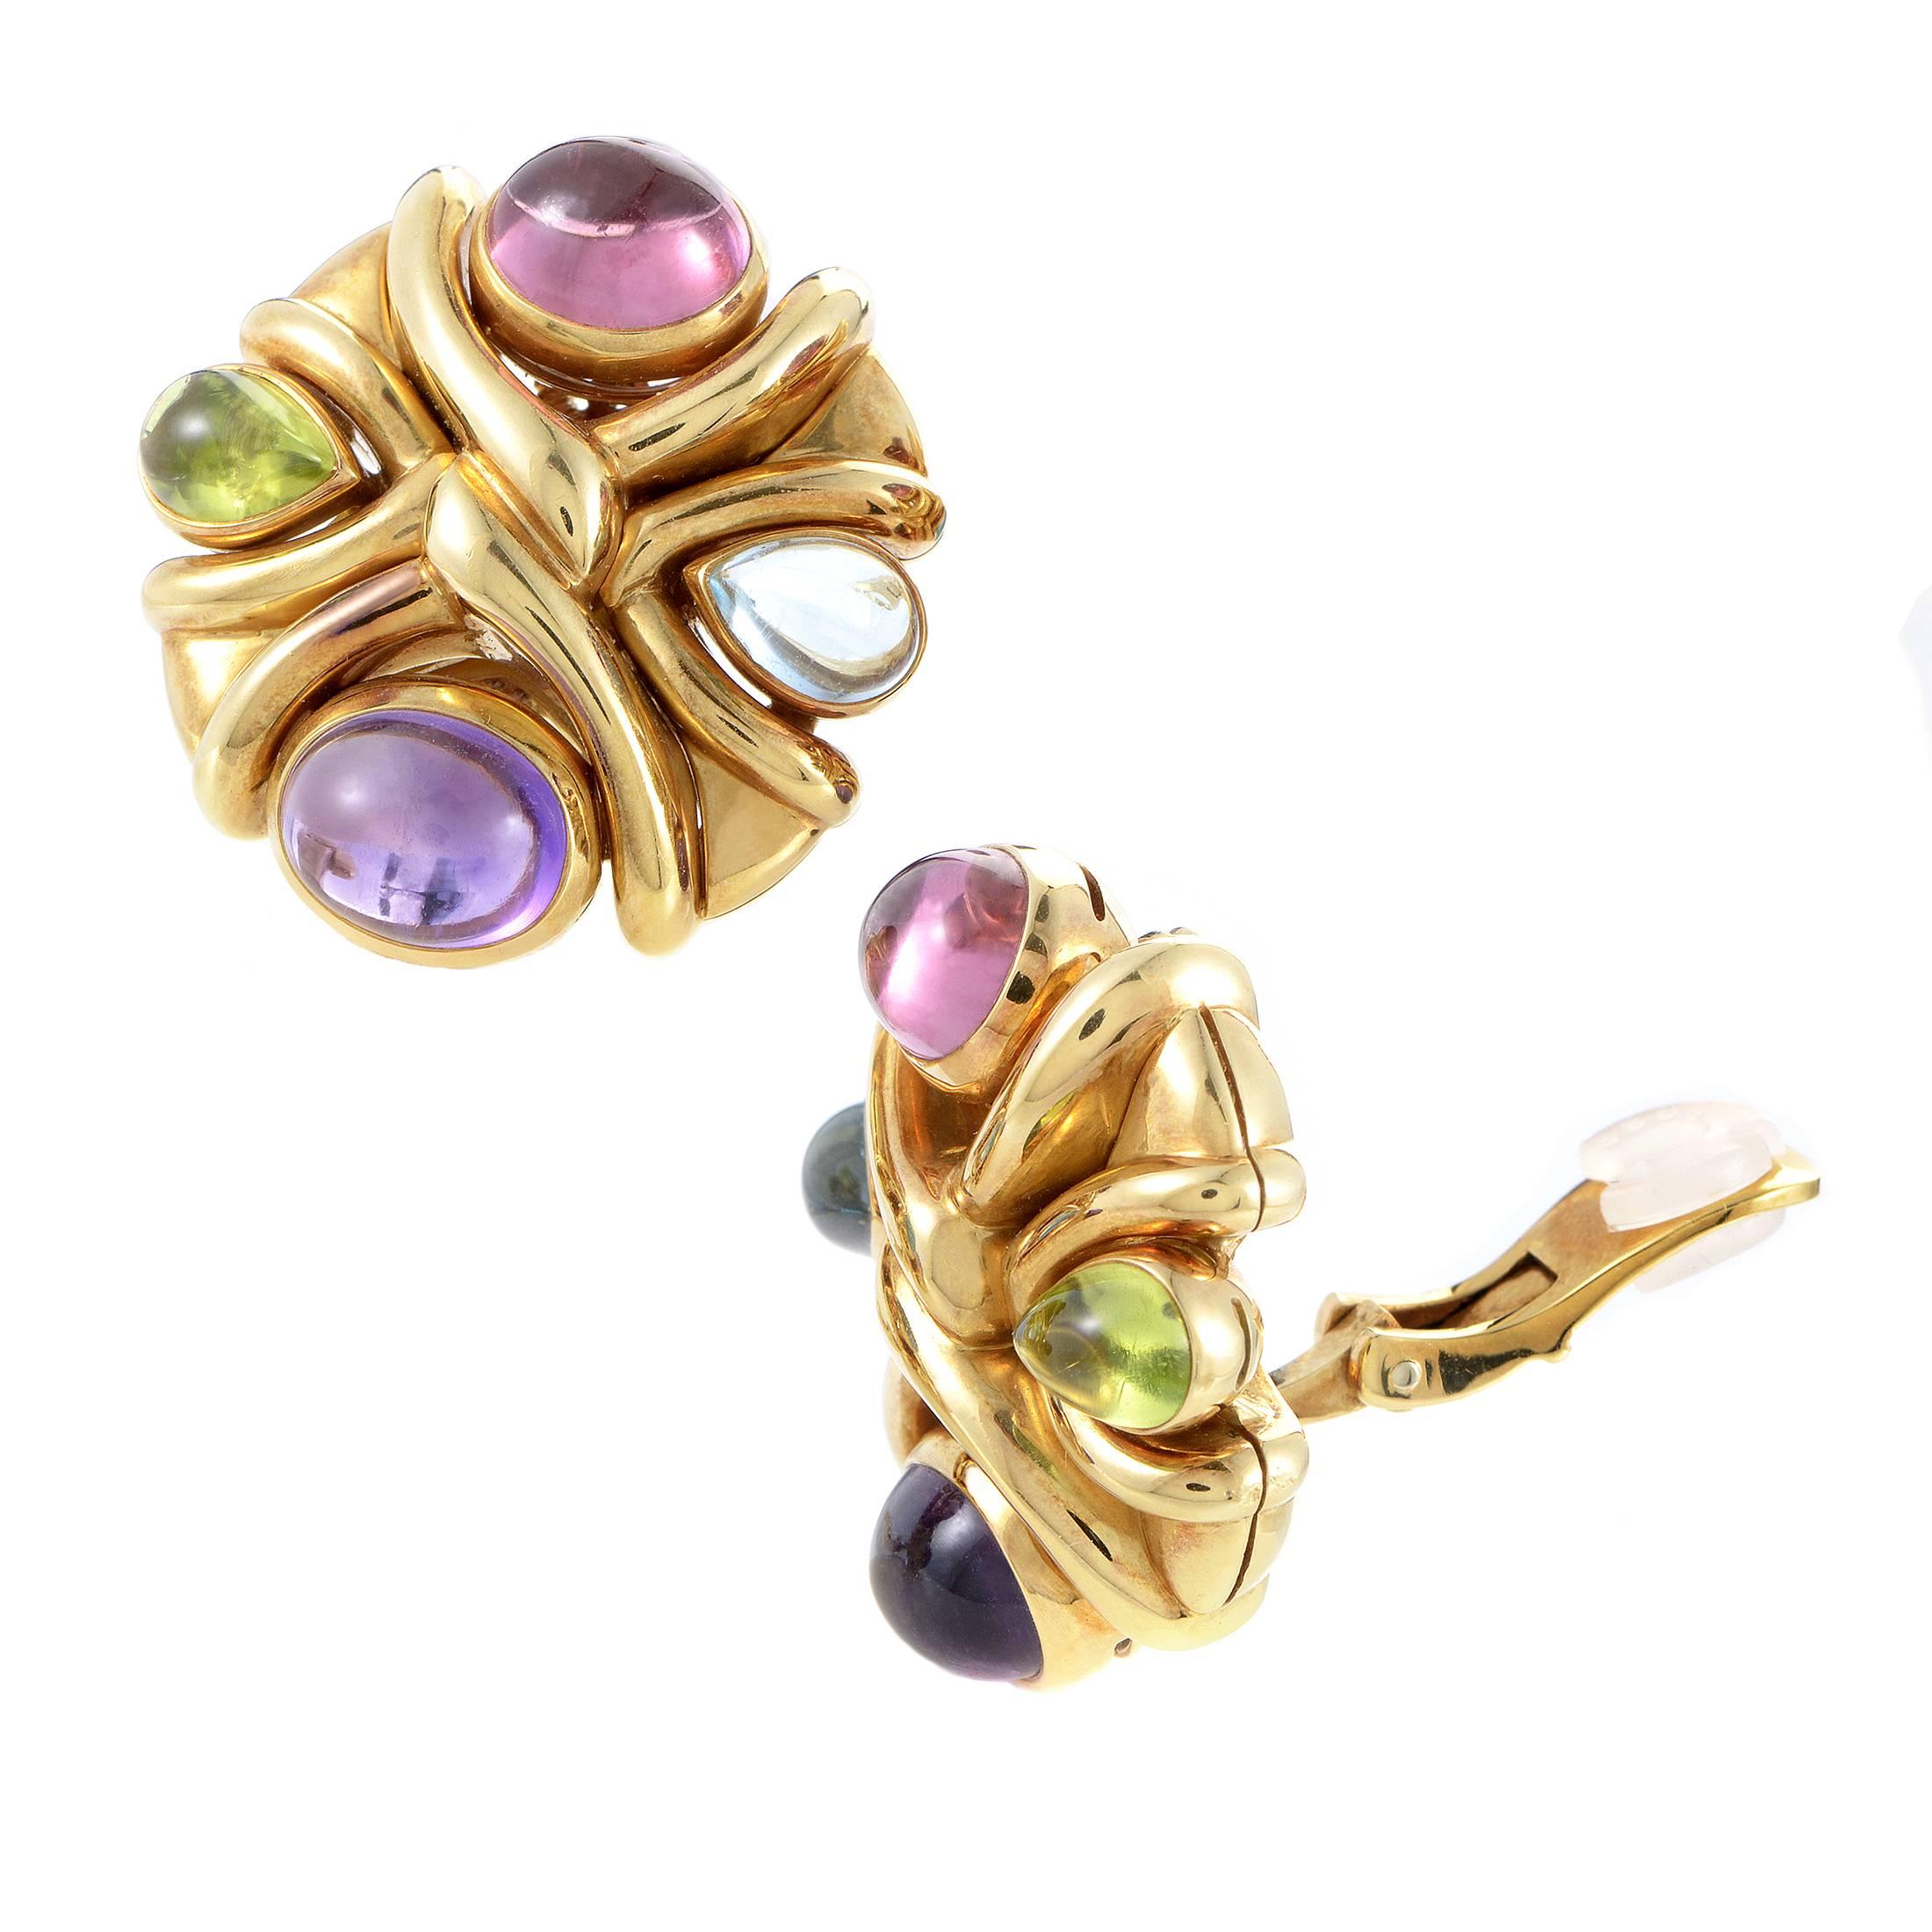 A vivacious and spellbinding blend of diversely colored gems is complemented brilliantly by the intriguingly shaped and impeccably finished 18K yellow gold in these enchanting earrings from Bulgari that boast amethysts and pink tourmalines as well